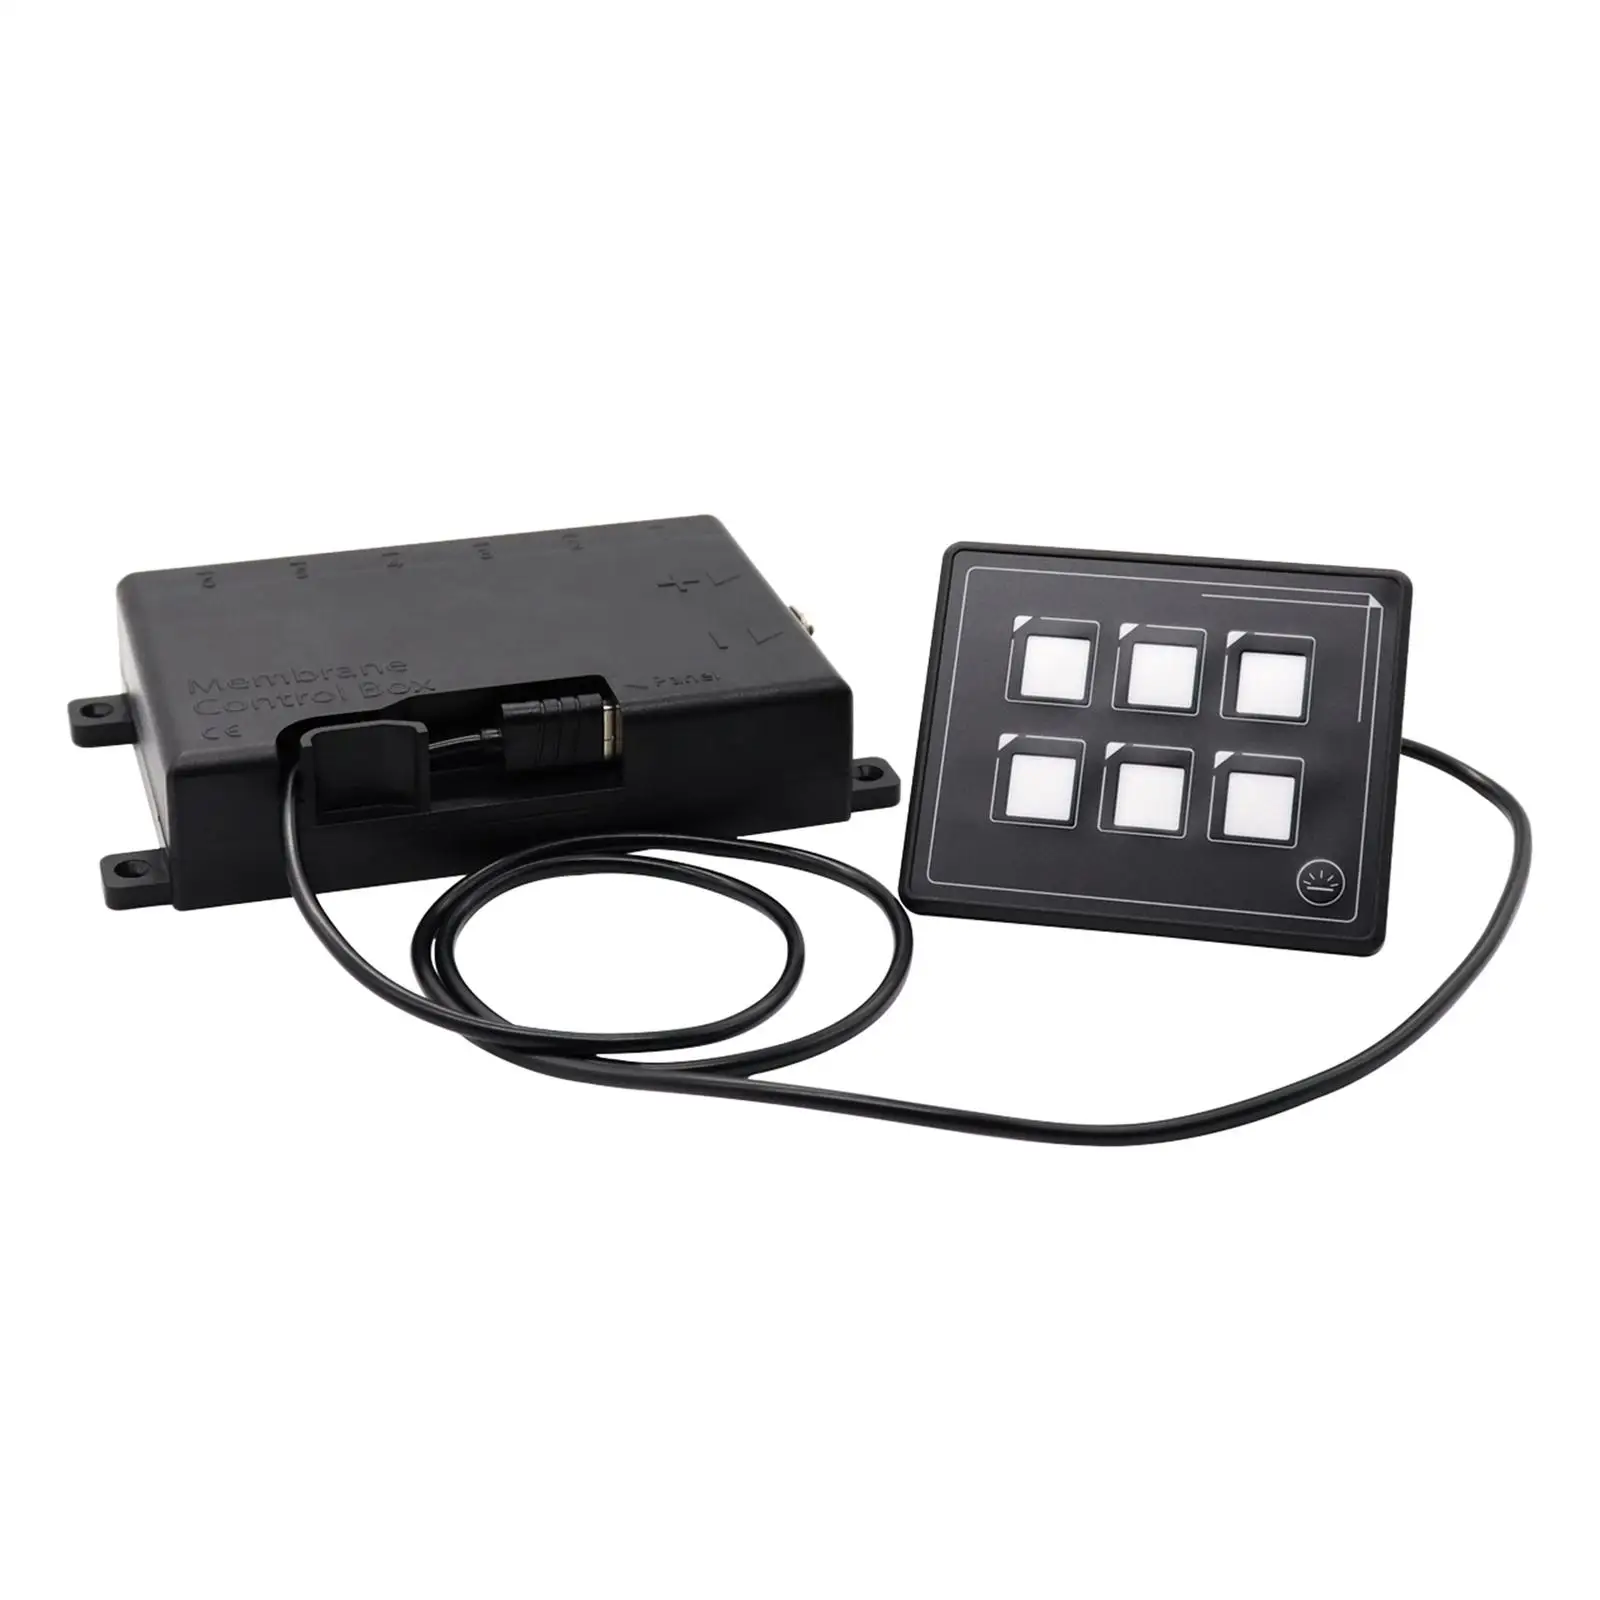 6 Pin Film Button Touch Screen LED Switch Panel, Waterproof W/USB Cable & Membrane Control Box Built in Pptc for Truck RV